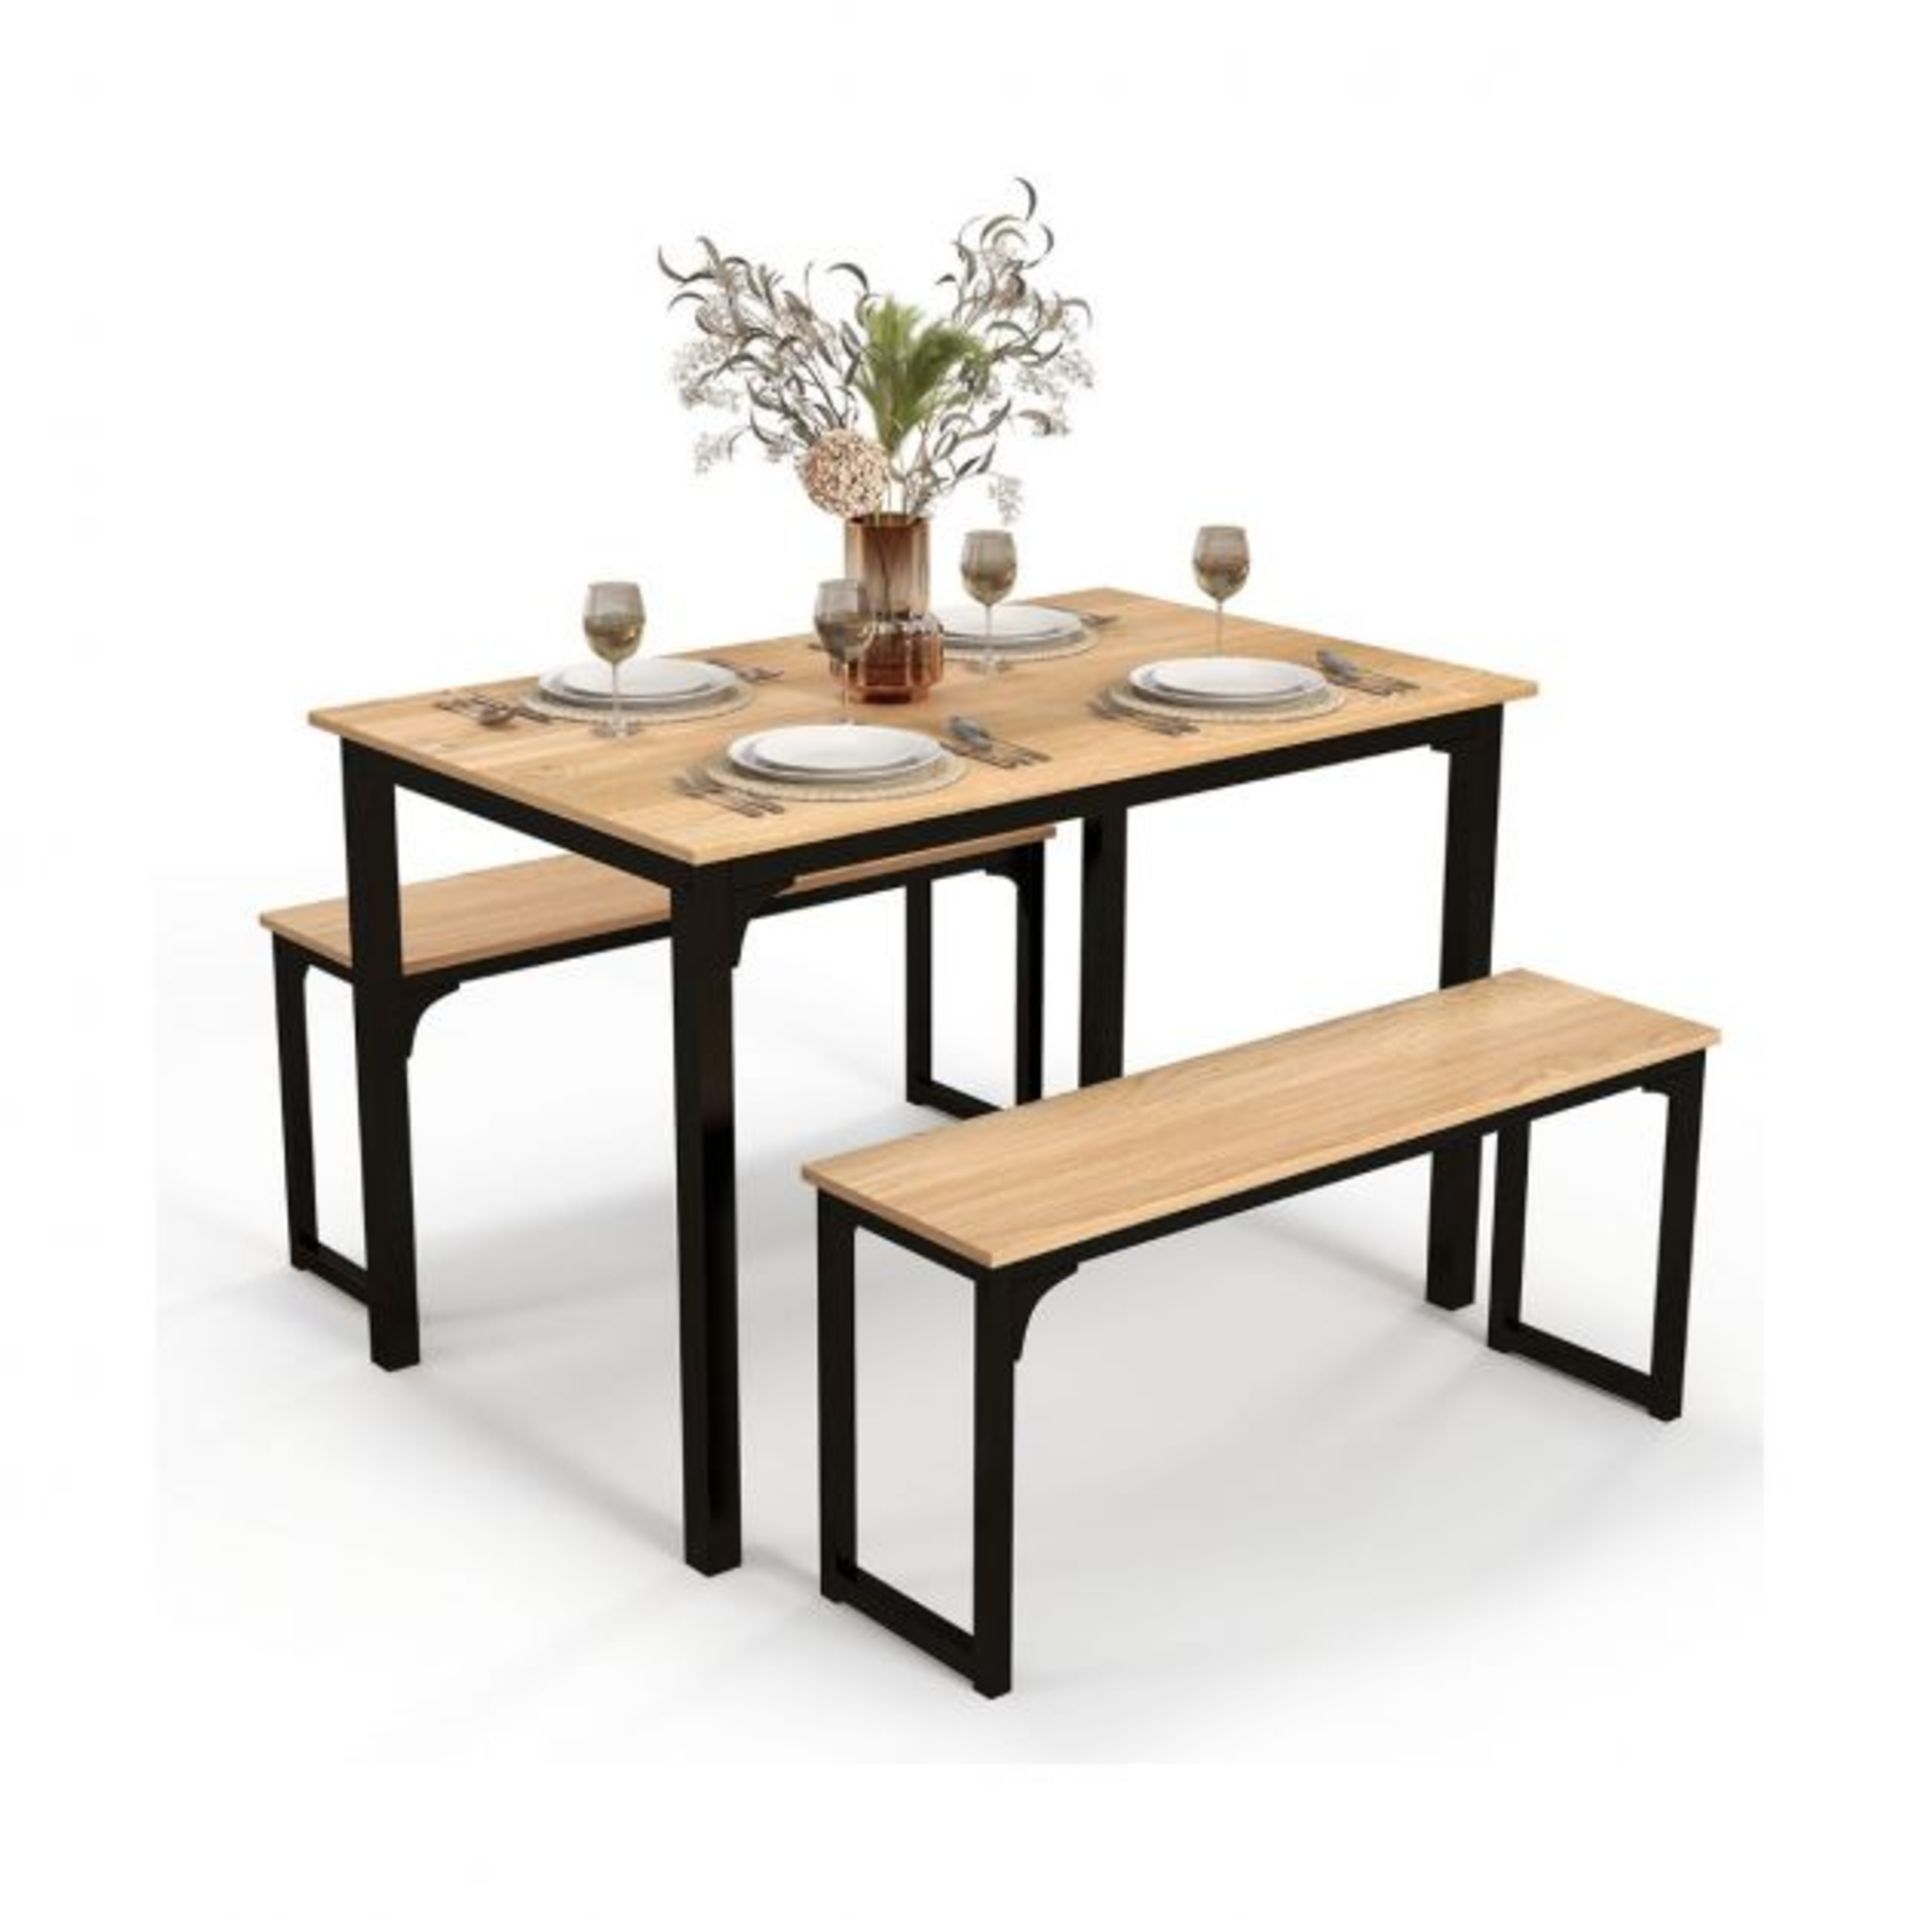 3 Pieces Space-Saving Dining Breakfast Table Set with 2 Benches - RRP £134.99 (LOCATION - H/S R 2.